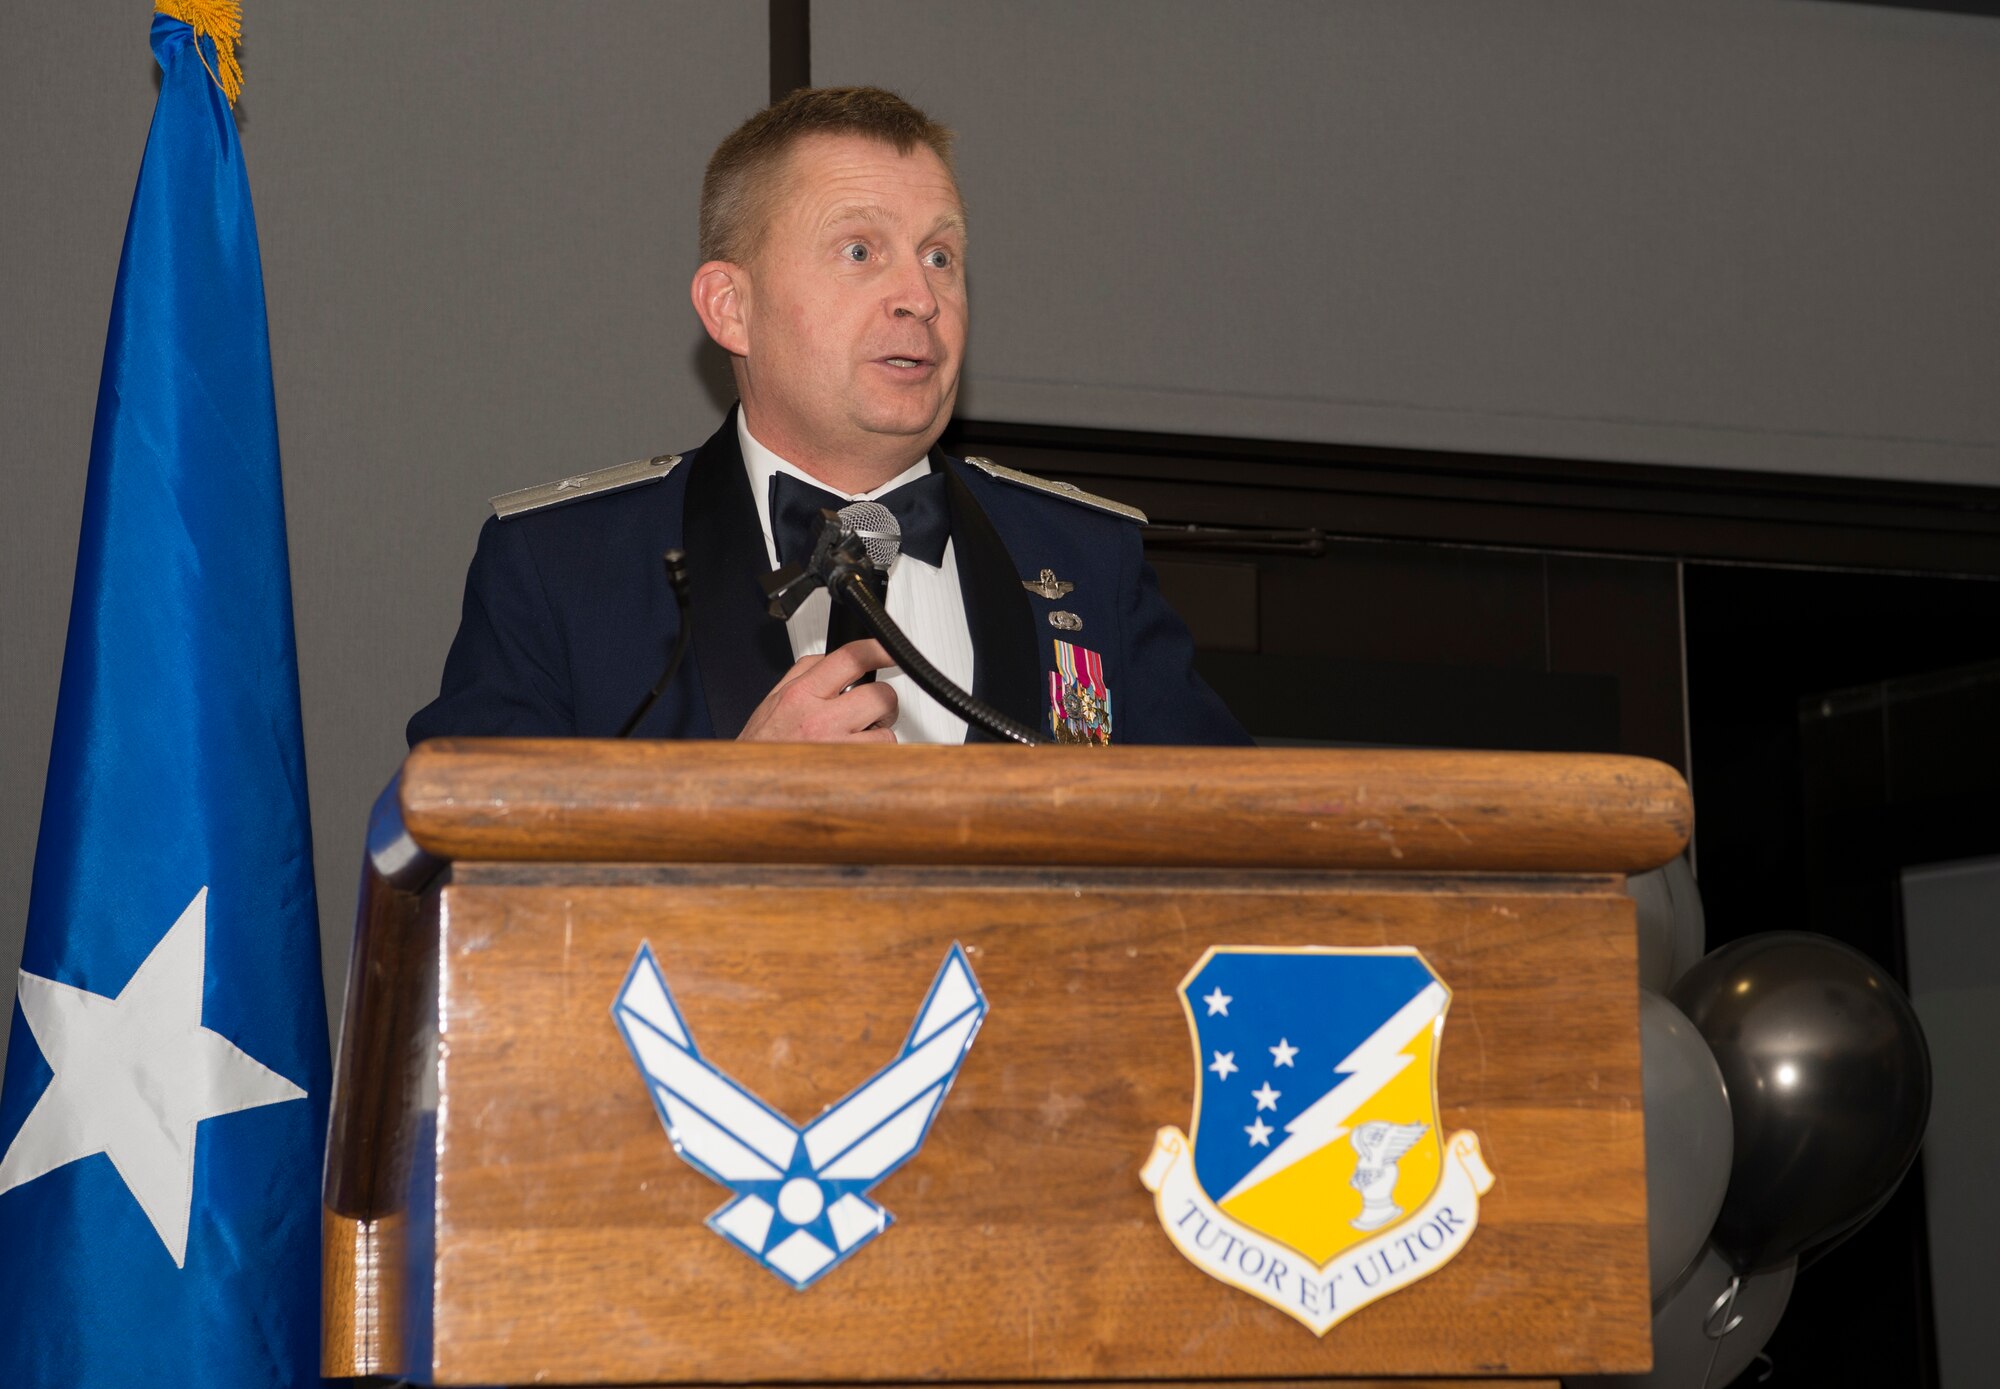 Brig. Gen. James R. Cluff, Remotely Piloted Aircraft, Big Wing Intelligence, Surveillance and Reconnaissance director, speaks at the 2018 Annual Awards Banquet, Feb. 9, 2019, on Holloman Air Force Base, N.M. During the banquet, 14 Holloman Airmen Airmen received awards for their outstanding performance throughout the year. (U.S. Air Force photo by Airman Quion Lowe)